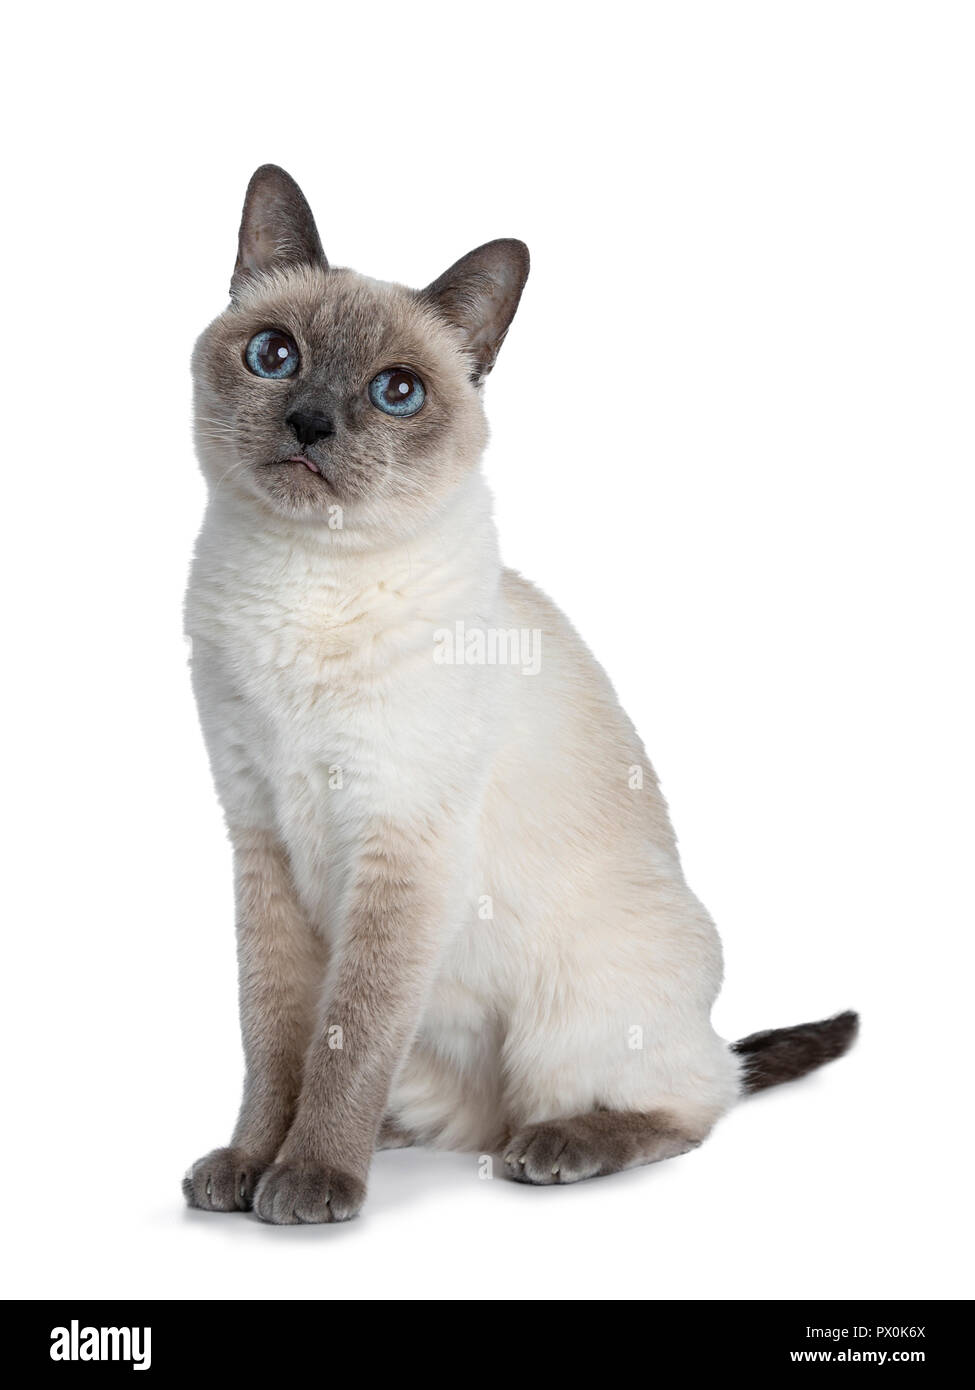 Senior blue point Thai cat sitting side ways, looking above camera with blue wise eyes. Isolated on white background. Stock Photo